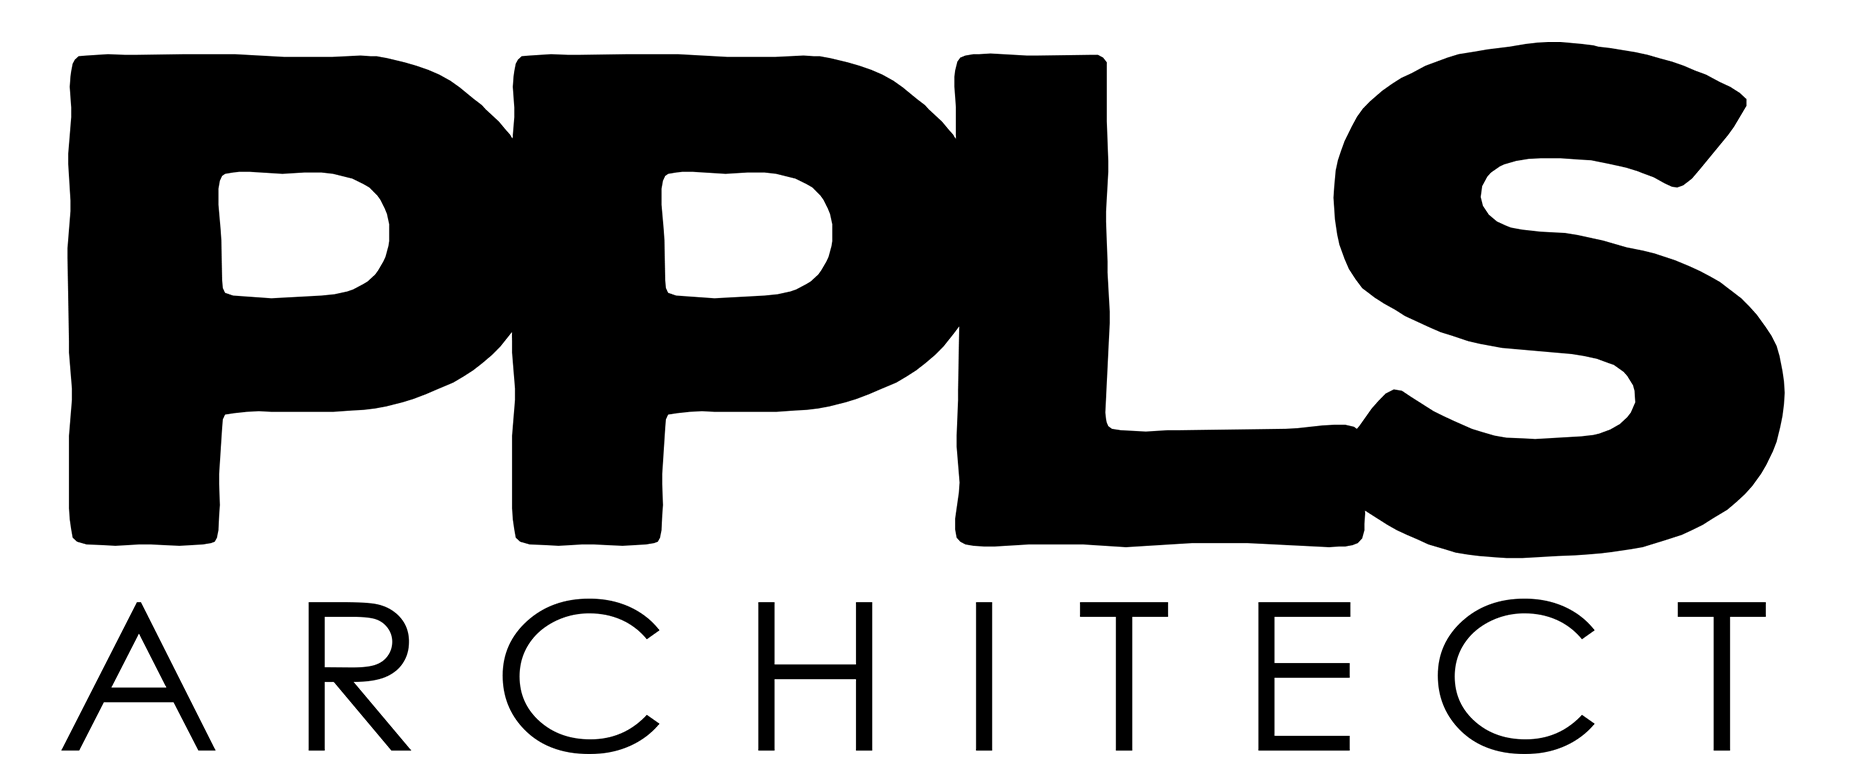 People's Architect Design Solutions Logo